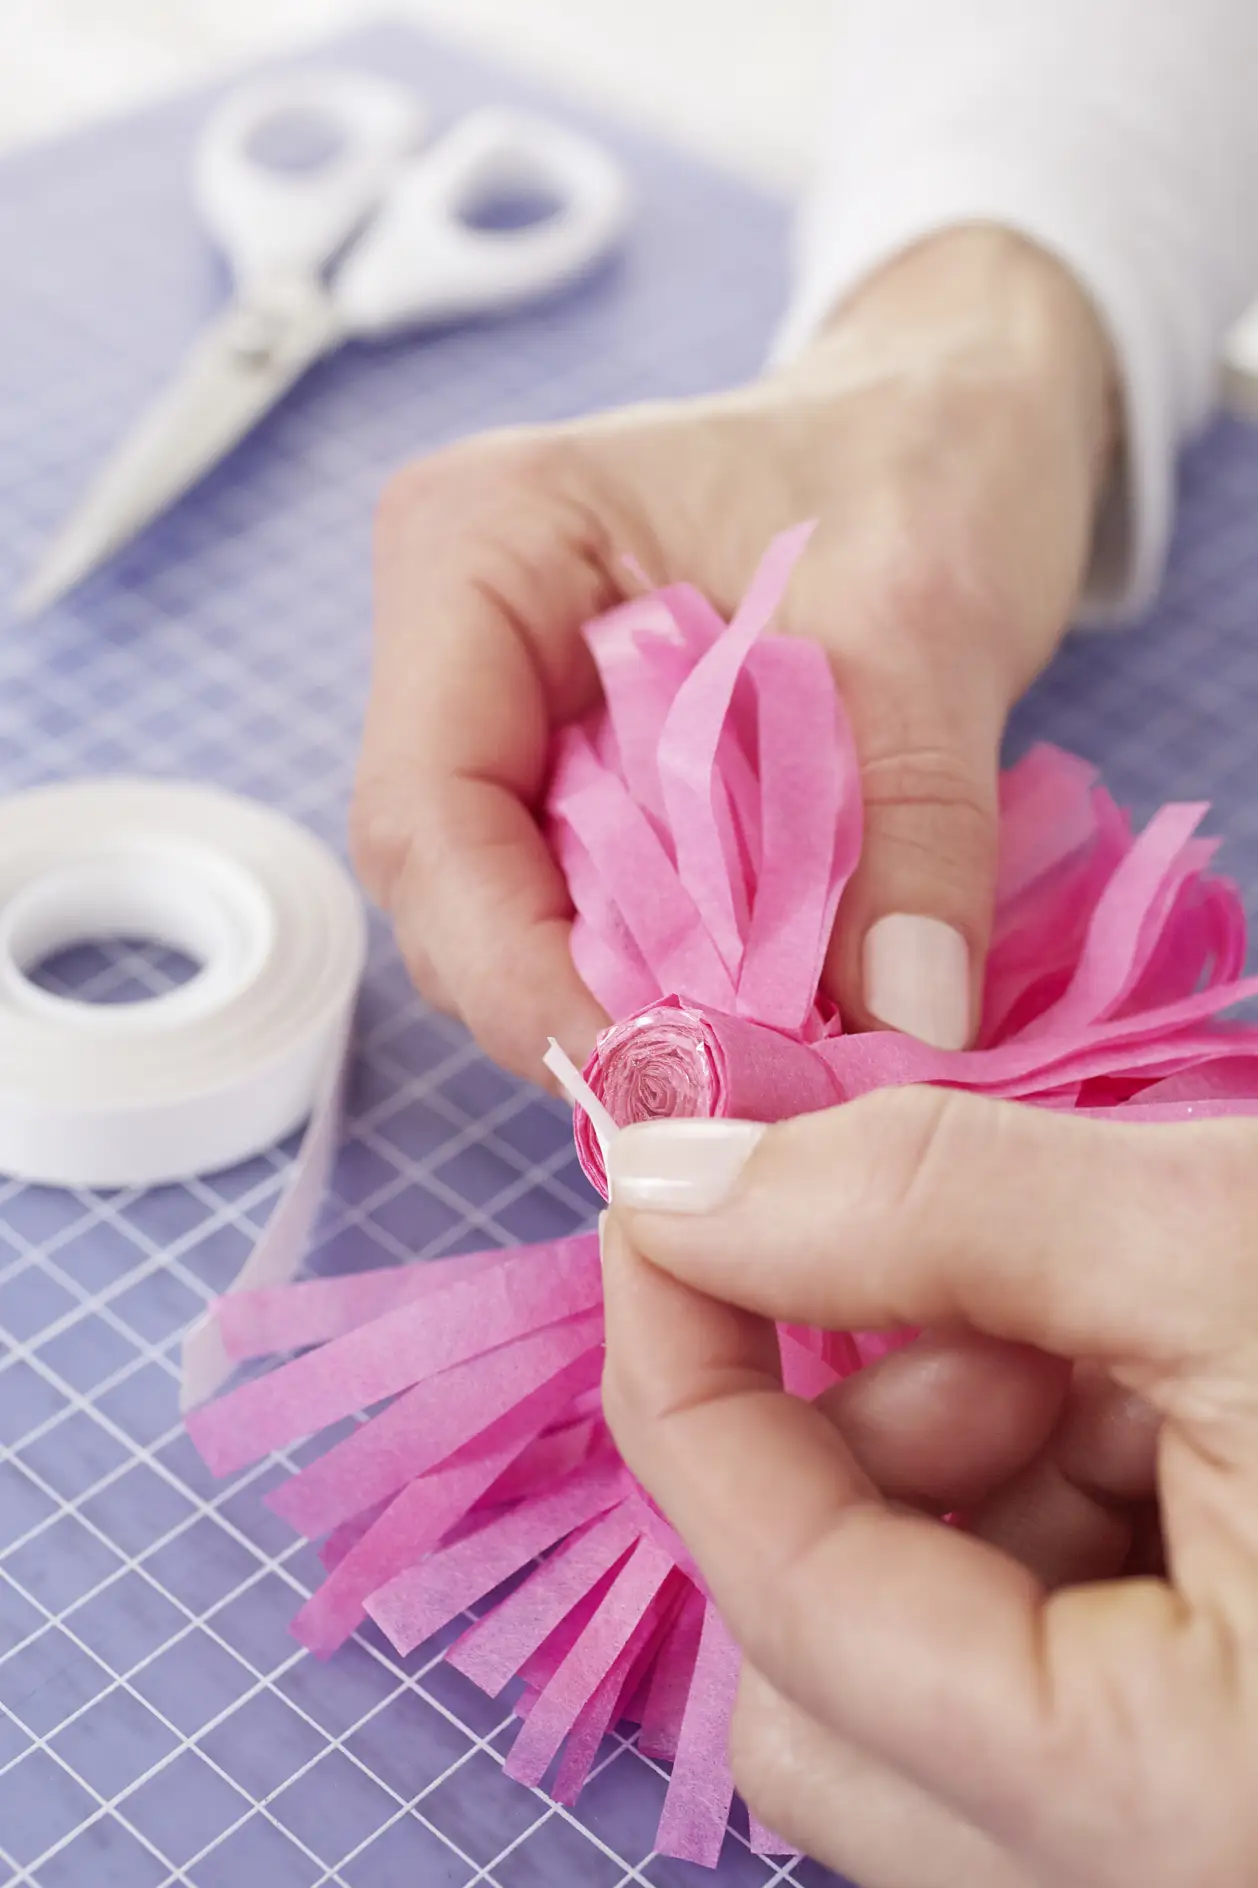 Apply a small piece of double-sided adhesive tape on the bottom of the pompom